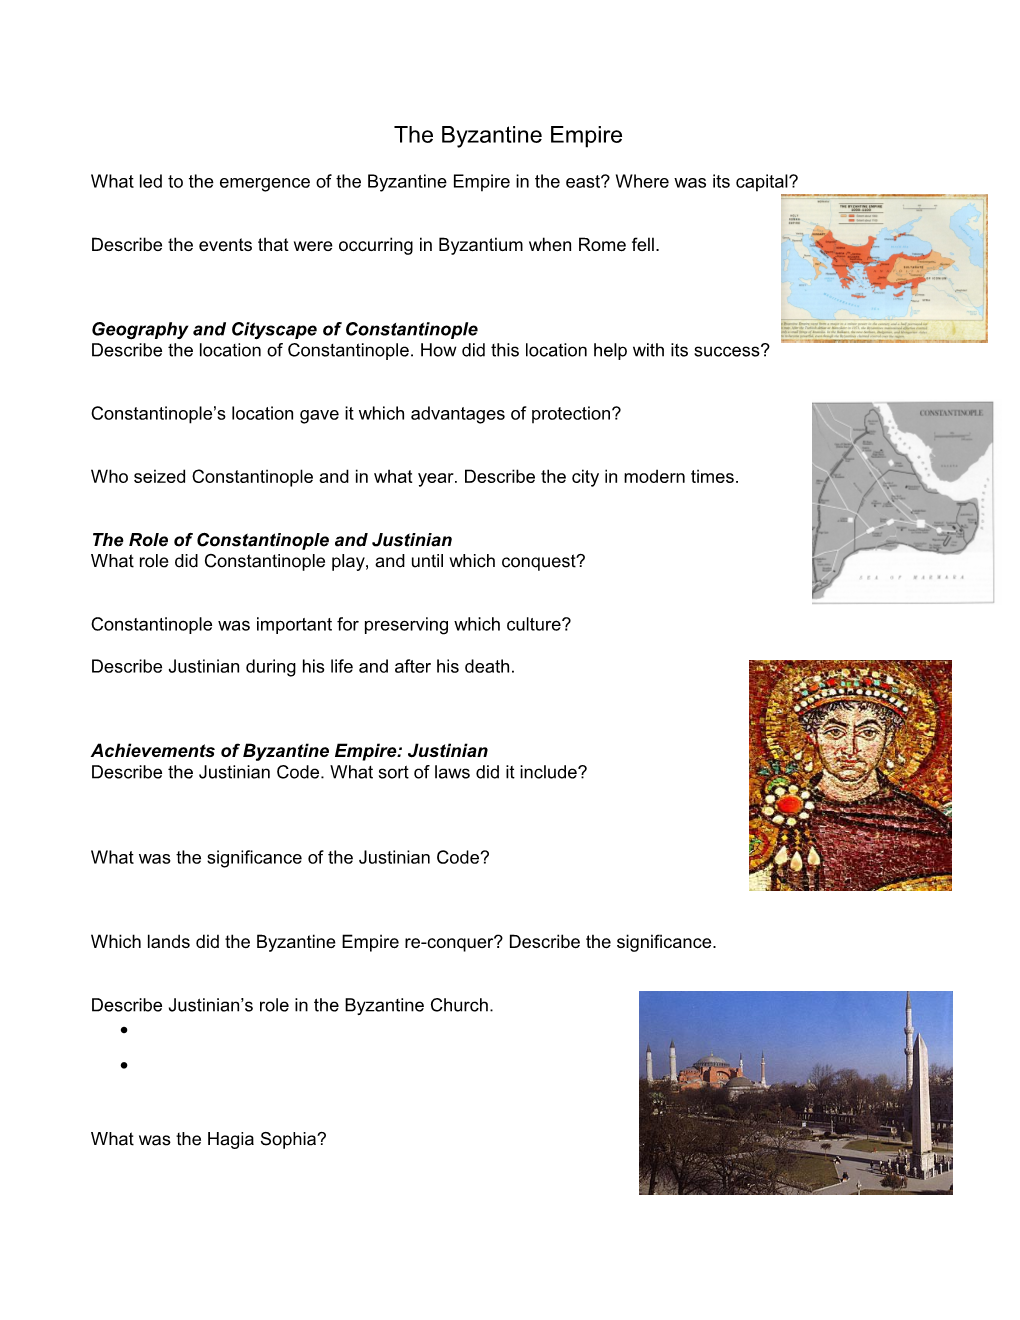 Geography and Cityscape of Constantinople